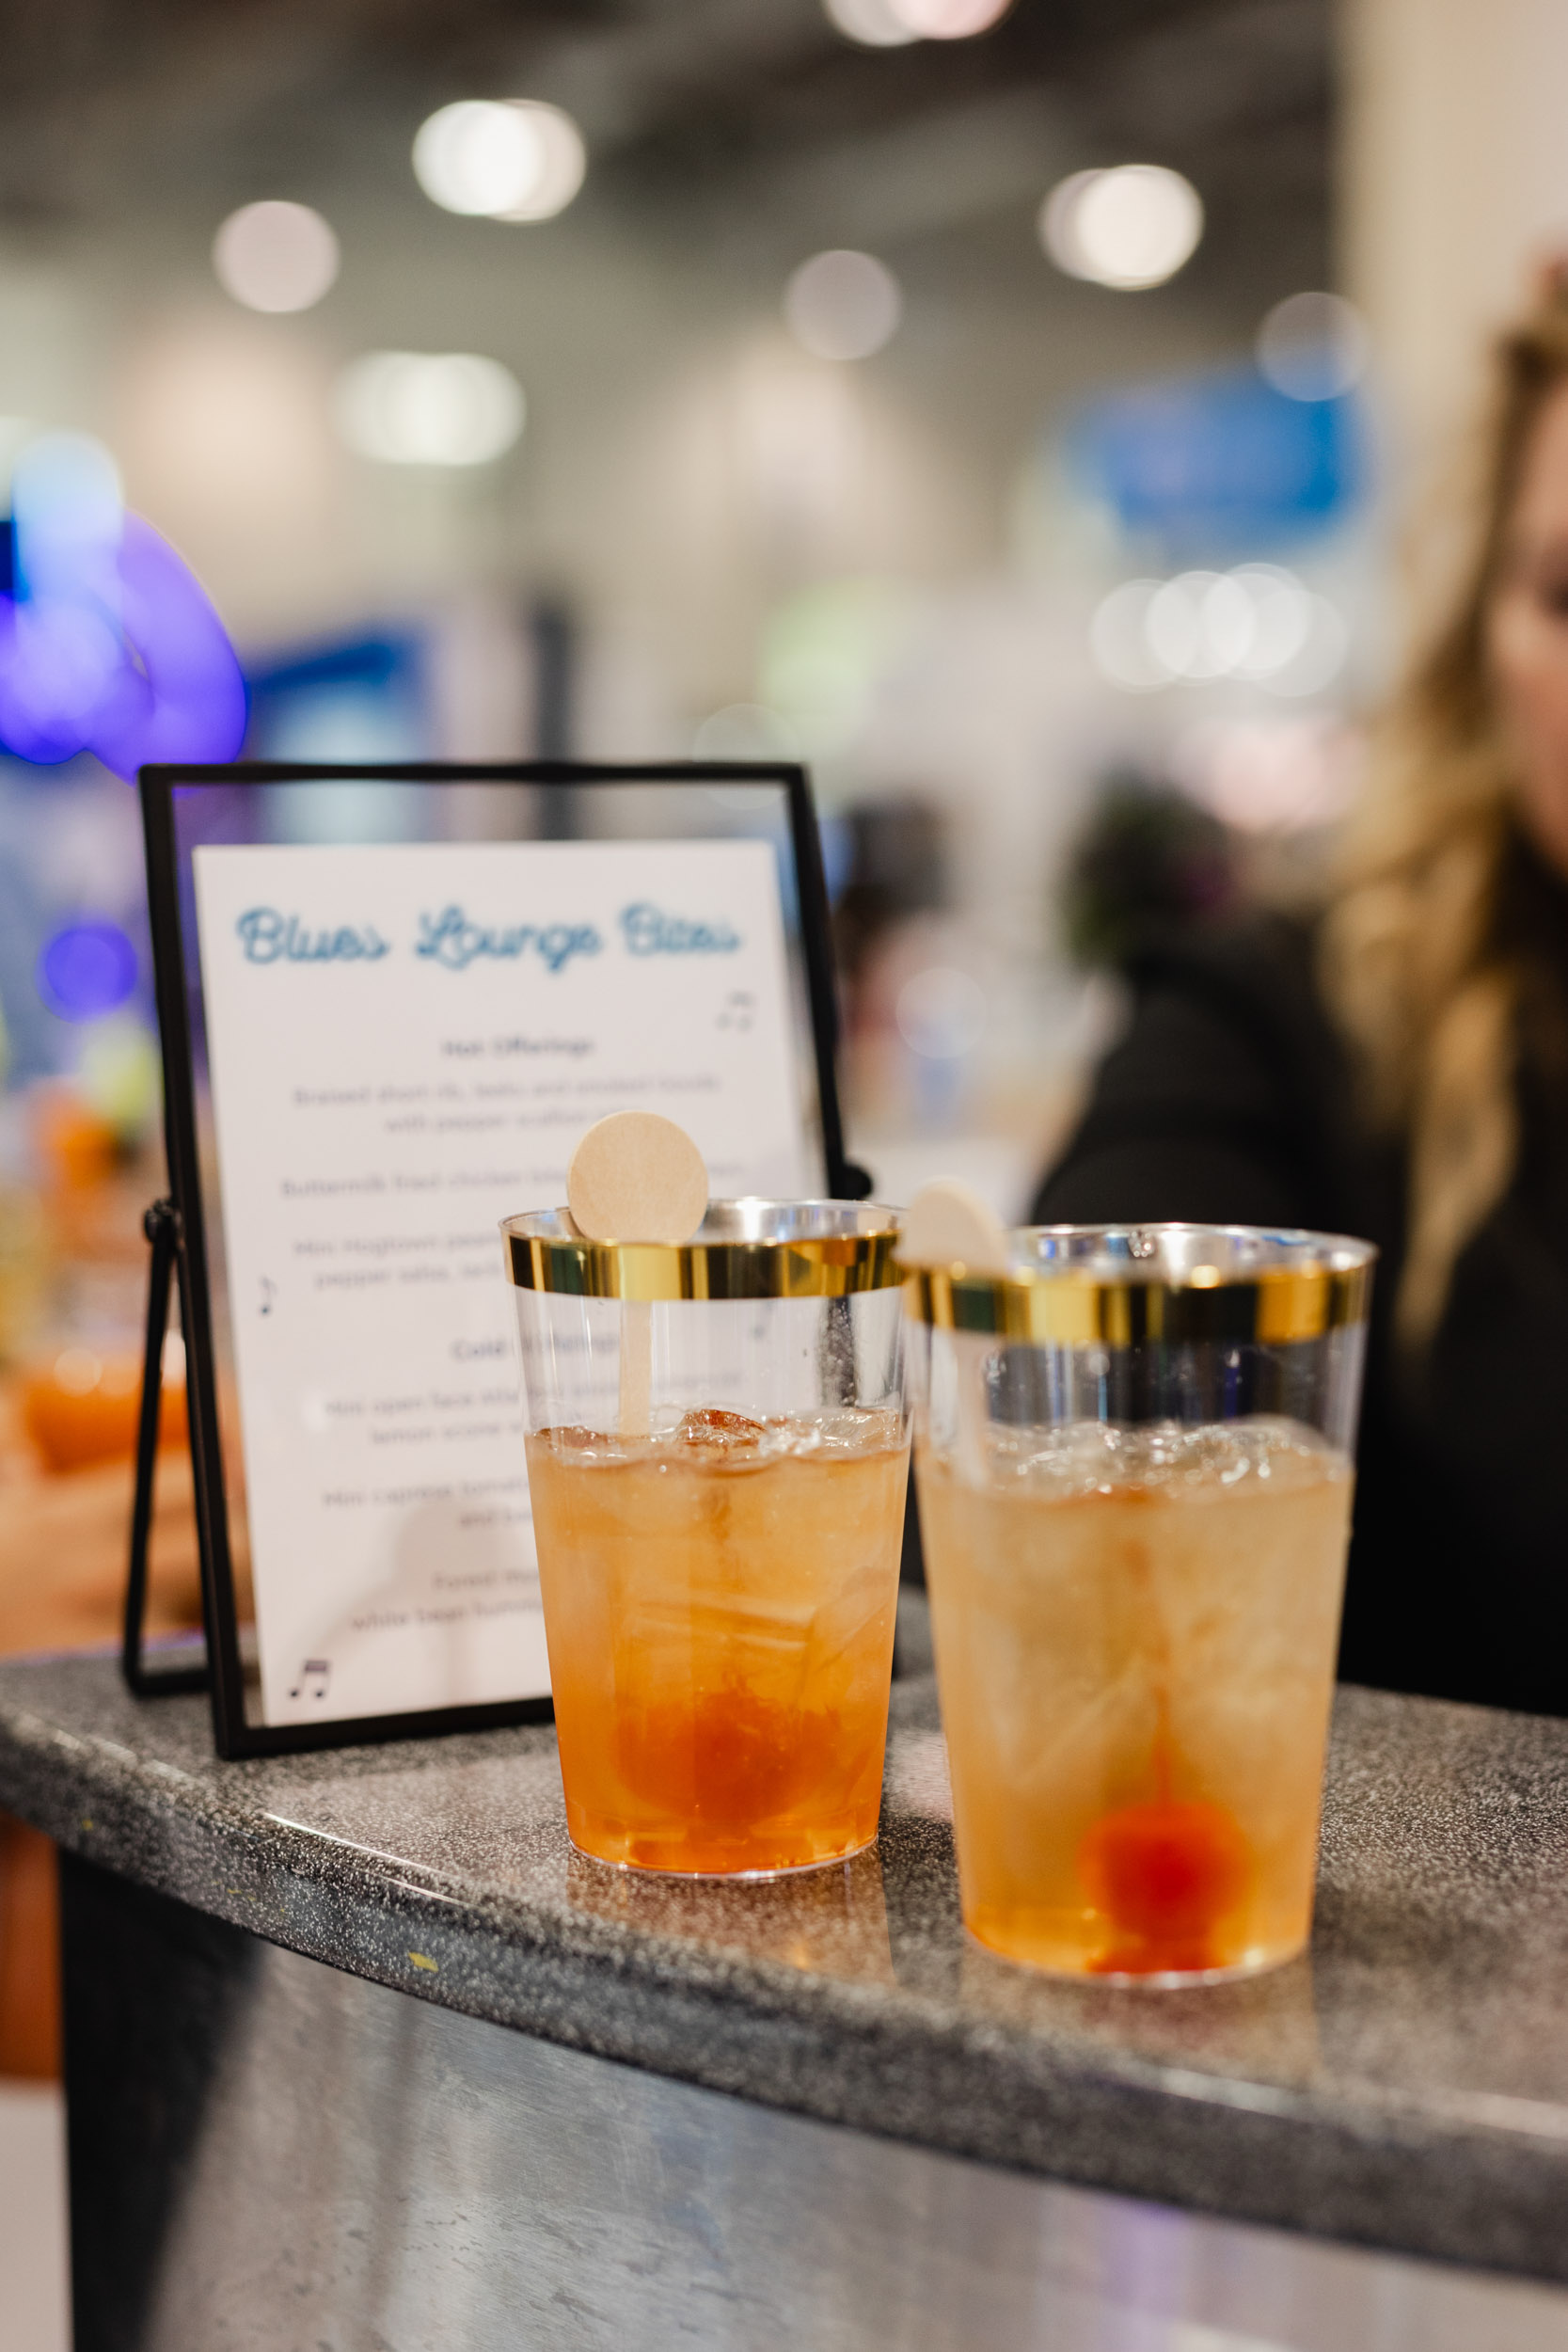 Photography captures two beverages displayed on a counter at a lively Toronto trade show.